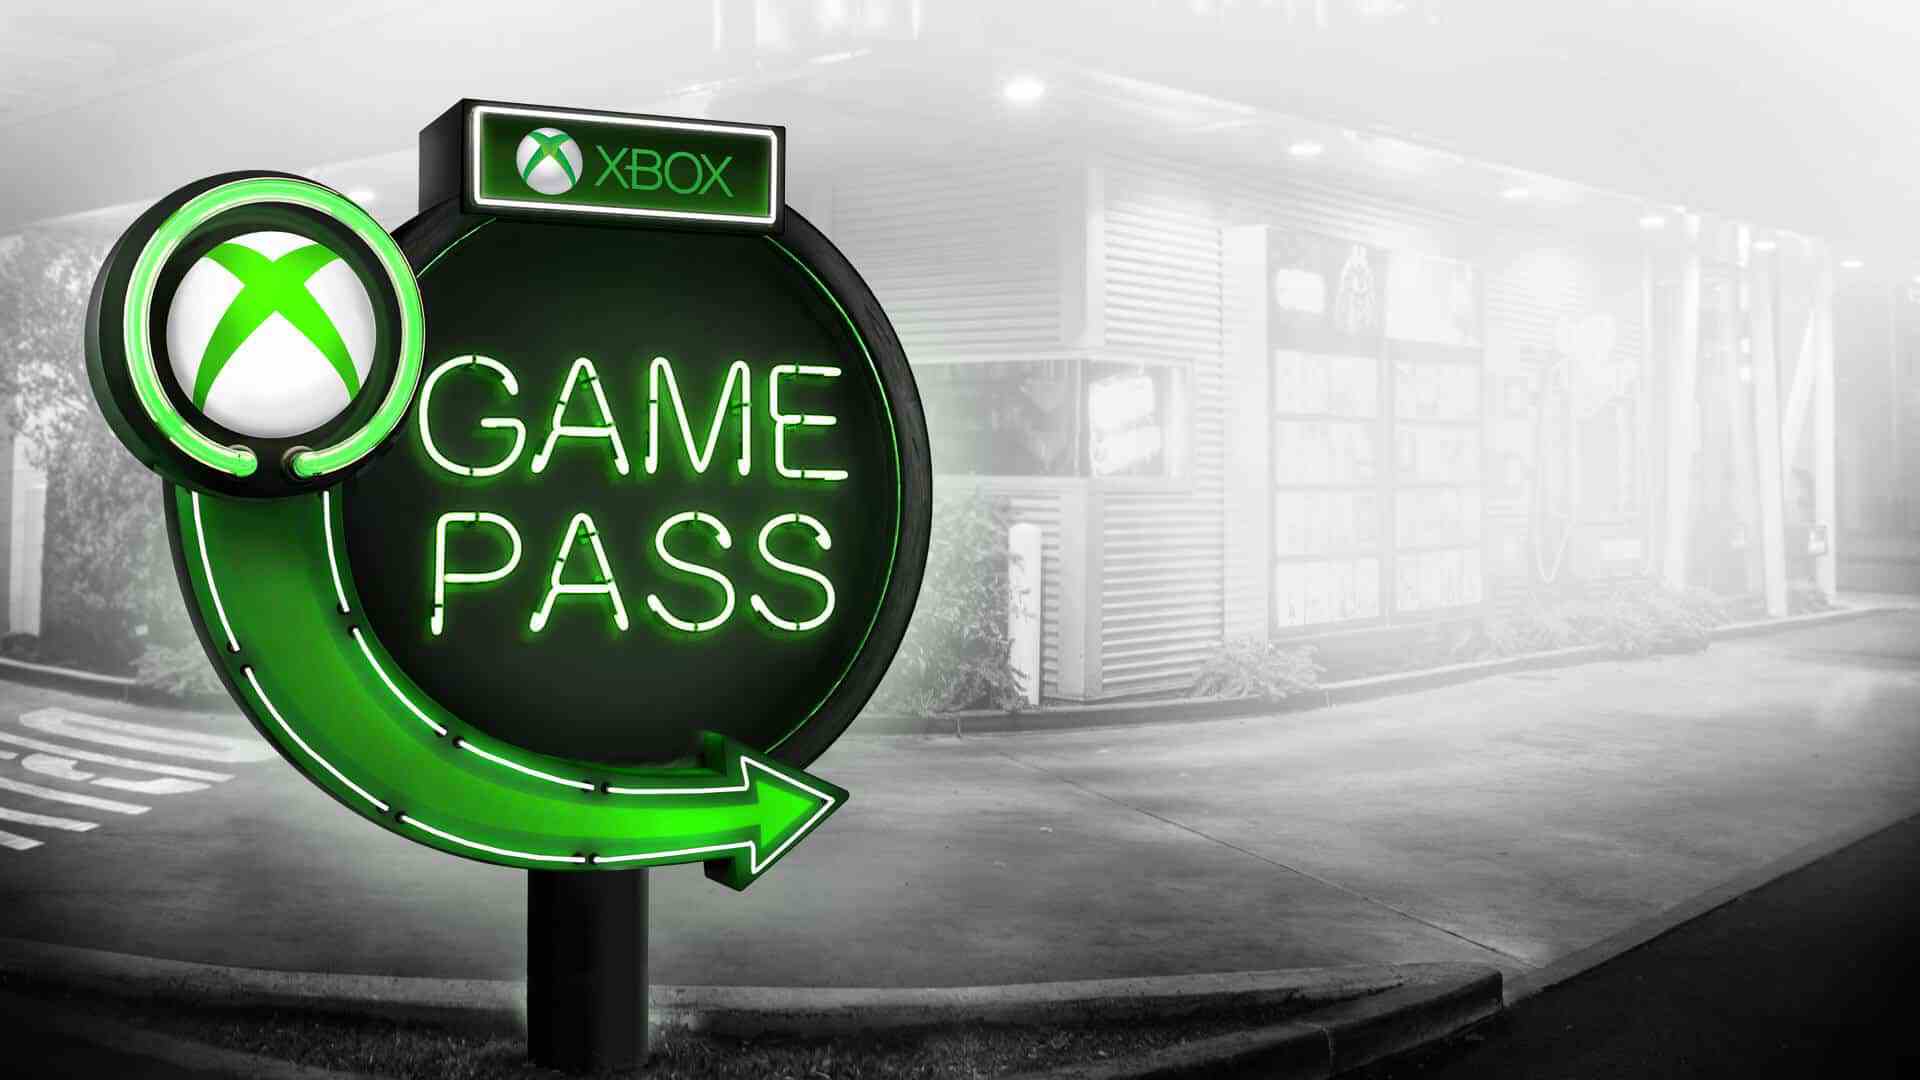 Xbox Game Pass: Microsoft Reaffirms Commitment to Bulking Up Service